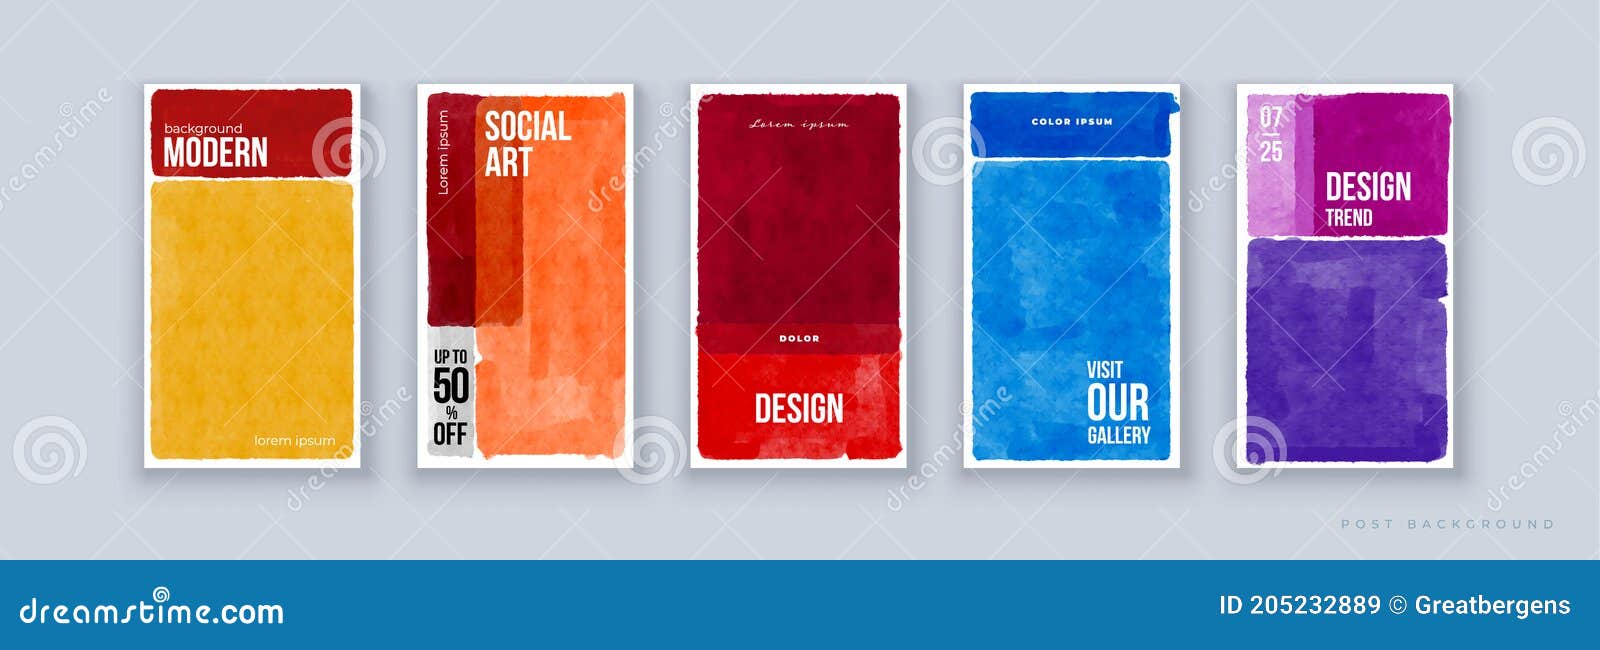 set of abstract banner  for social media, stories and insta post. modern background in vivid colors. modern